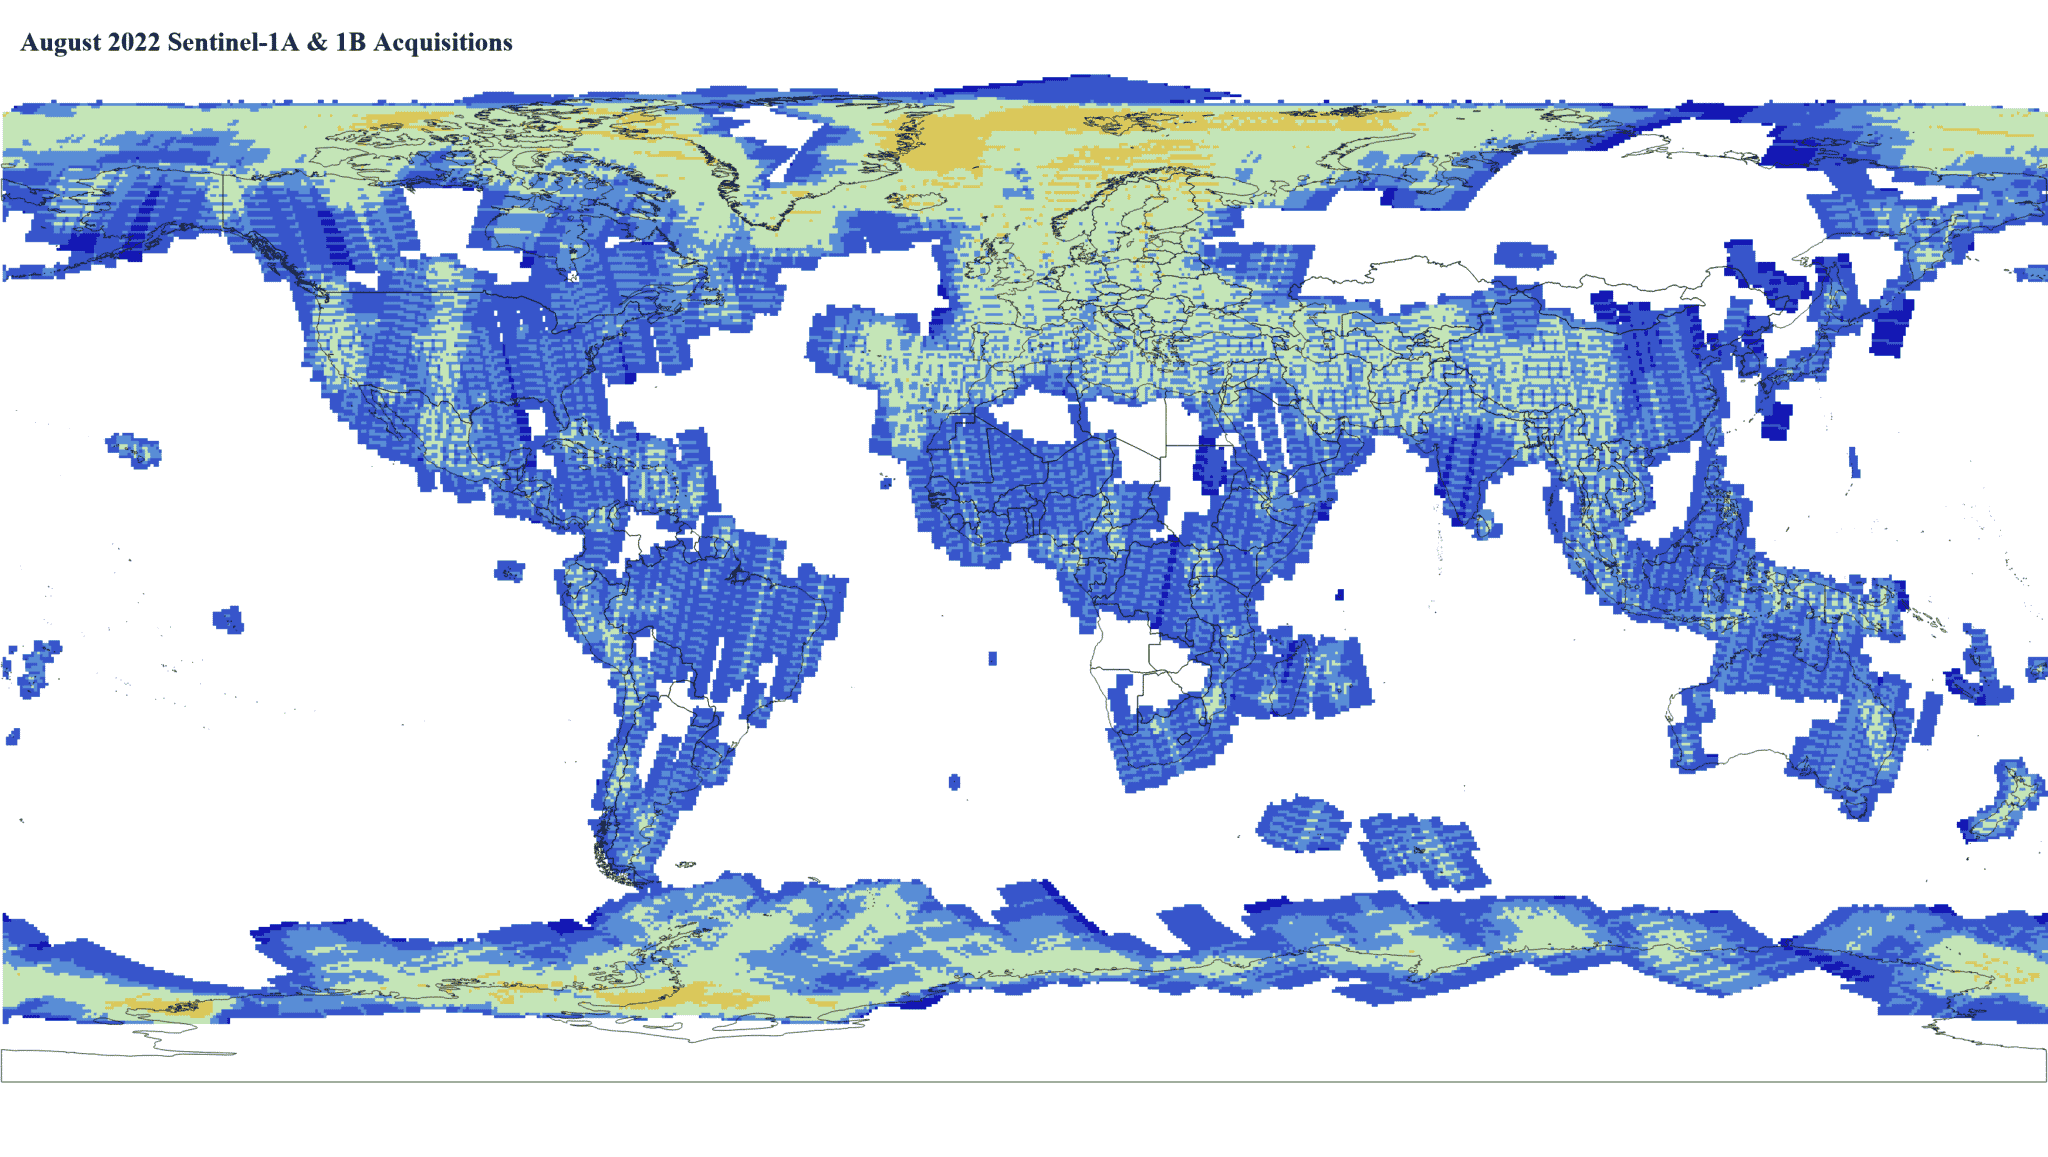 Heat map of Sentinel-1A and -1B GRD global acquisitions August 2022